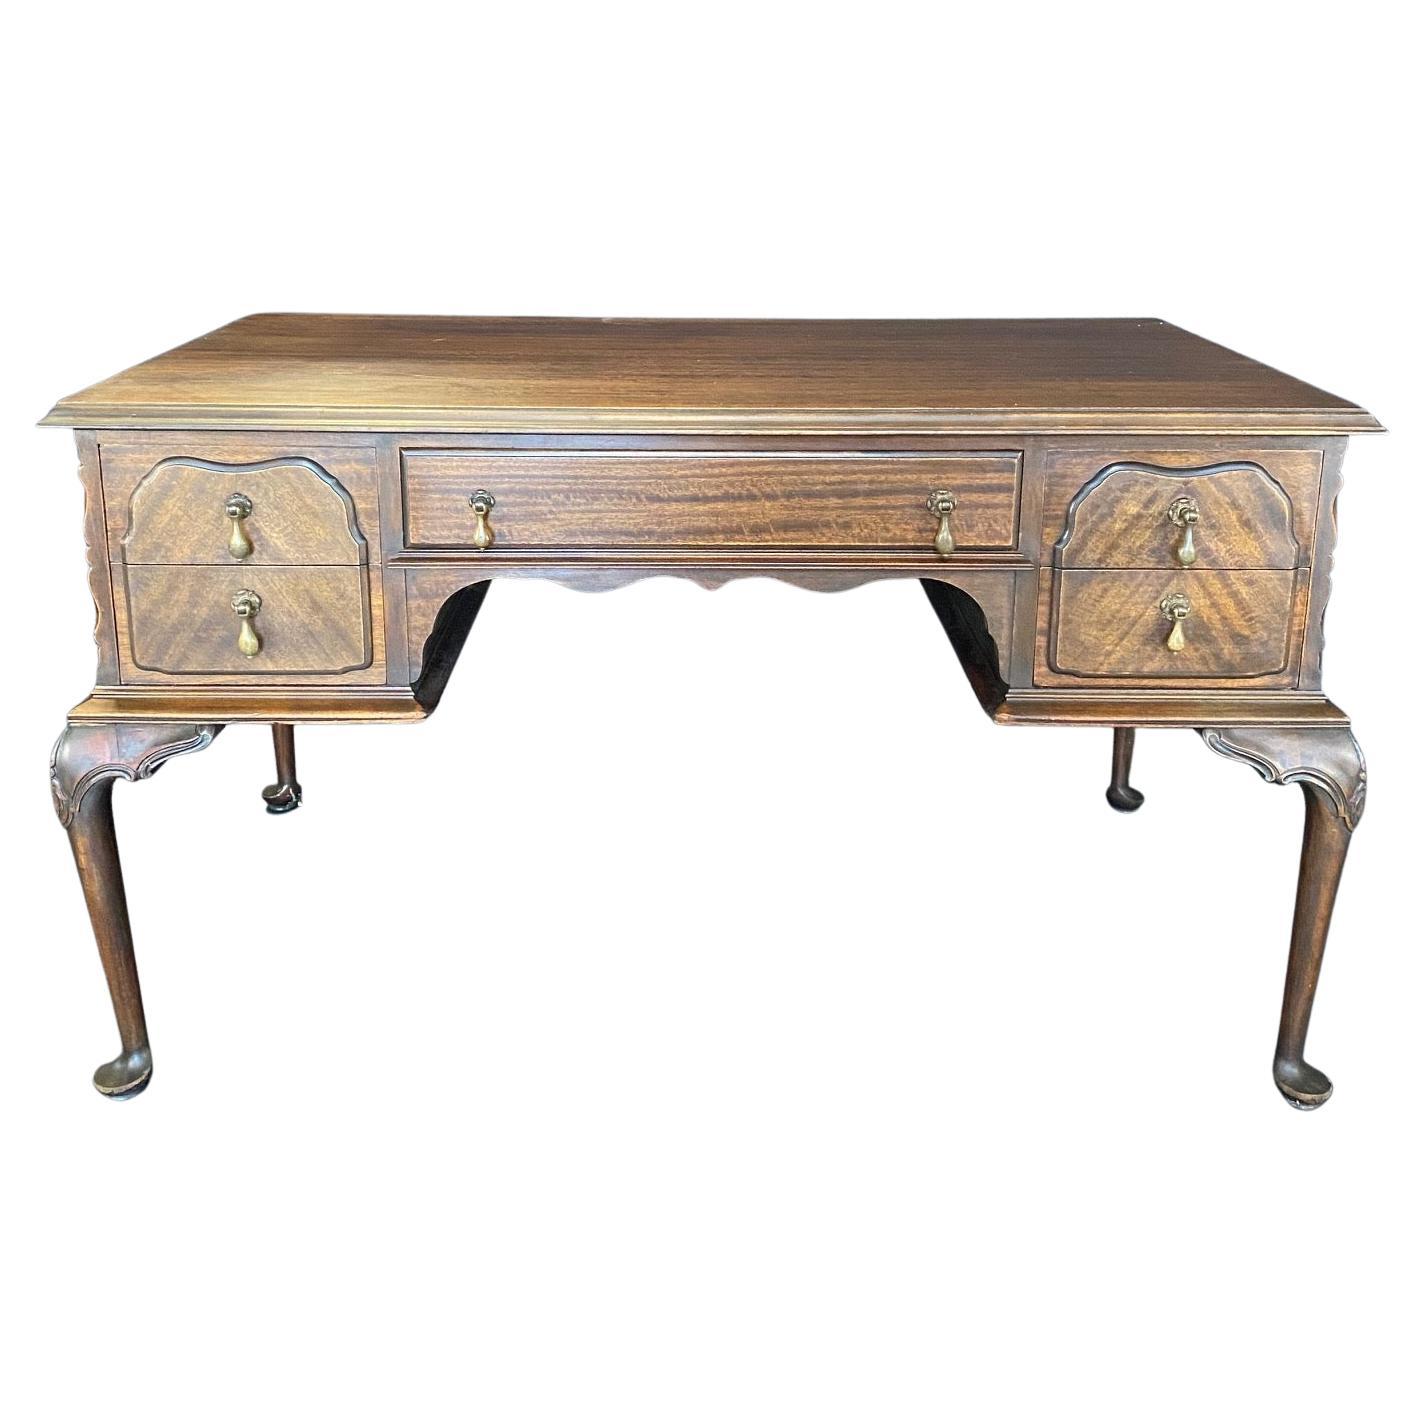 Handsome Antique French Louis XV Style Writing Table or Desk